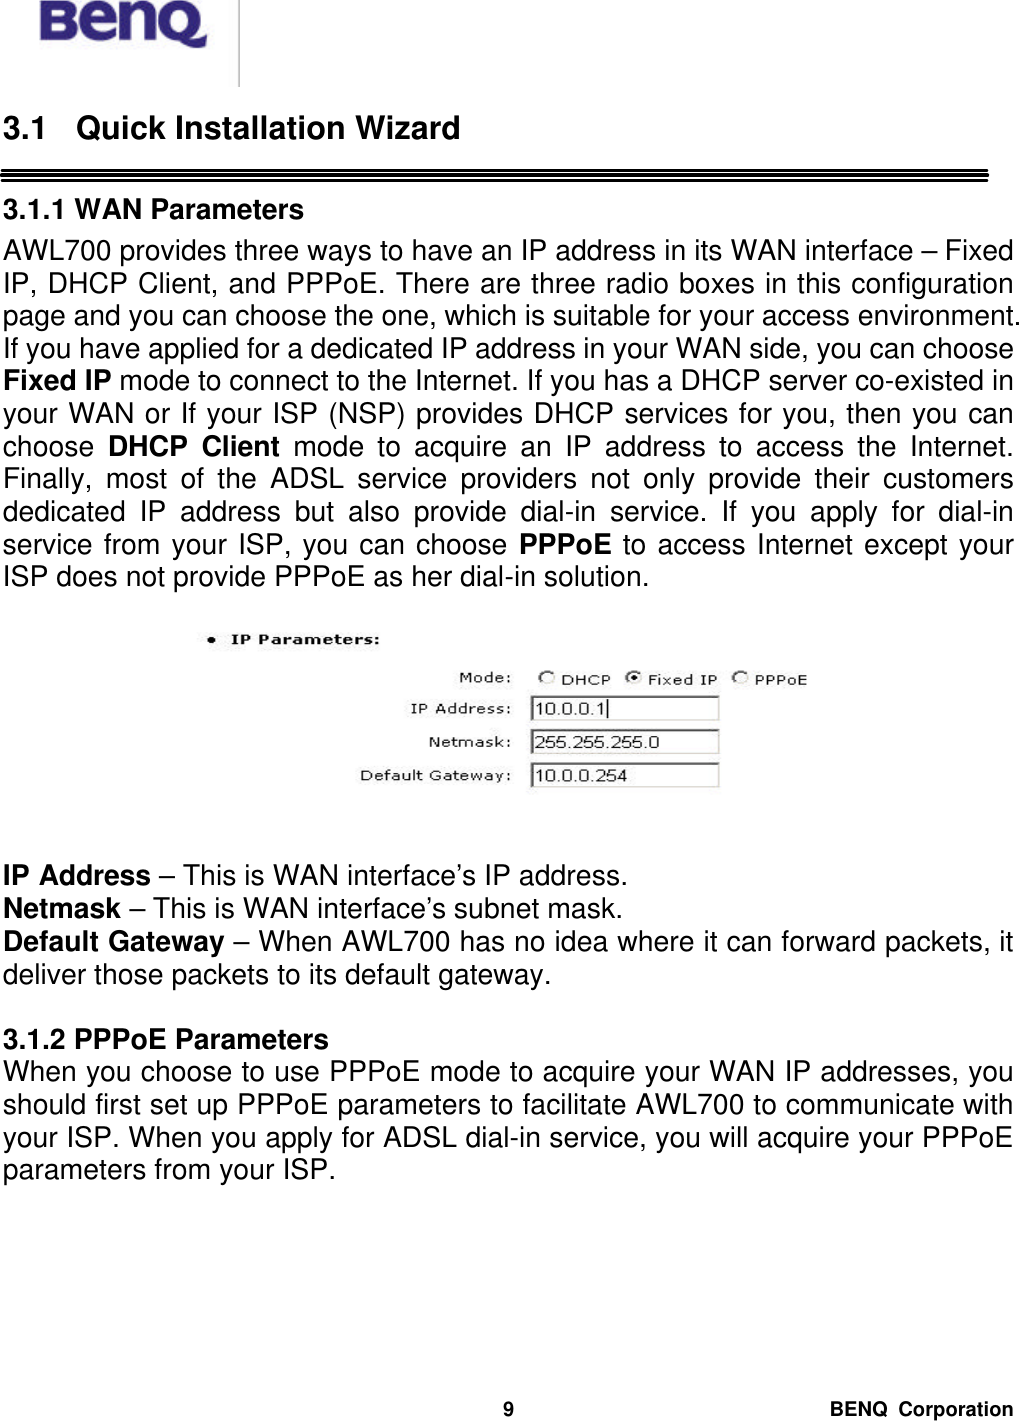  BENQ Corporation 9 3.1 Quick Installation Wizard  3.1.1 WAN Parameters AWL700 provides three ways to have an IP address in its WAN interface – Fixed IP, DHCP Client, and PPPoE. There are three radio boxes in this configuration page and you can choose the one, which is suitable for your access environment. If you have applied for a dedicated IP address in your WAN side, you can choose Fixed IP mode to connect to the Internet. If you has a DHCP server co-existed in your WAN or If your ISP (NSP) provides DHCP services for you, then you can choose  DHCP Client mode to acquire an IP address to access the Internet. Finally, most of the ADSL service providers not only provide their customers dedicated IP address but also provide dial-in service. If you apply for dial-in service from your ISP, you can choose PPPoE to access Internet except your ISP does not provide PPPoE as her dial-in solution.     IP Address – This is WAN interface’s IP address. Netmask – This is WAN interface’s subnet mask. Default Gateway – When AWL700 has no idea where it can forward packets, it deliver those packets to its default gateway.    3.1.2 PPPoE Parameters When you choose to use PPPoE mode to acquire your WAN IP addresses, you should first set up PPPoE parameters to facilitate AWL700 to communicate with your ISP. When you apply for ADSL dial-in service, you will acquire your PPPoE parameters from your ISP.  